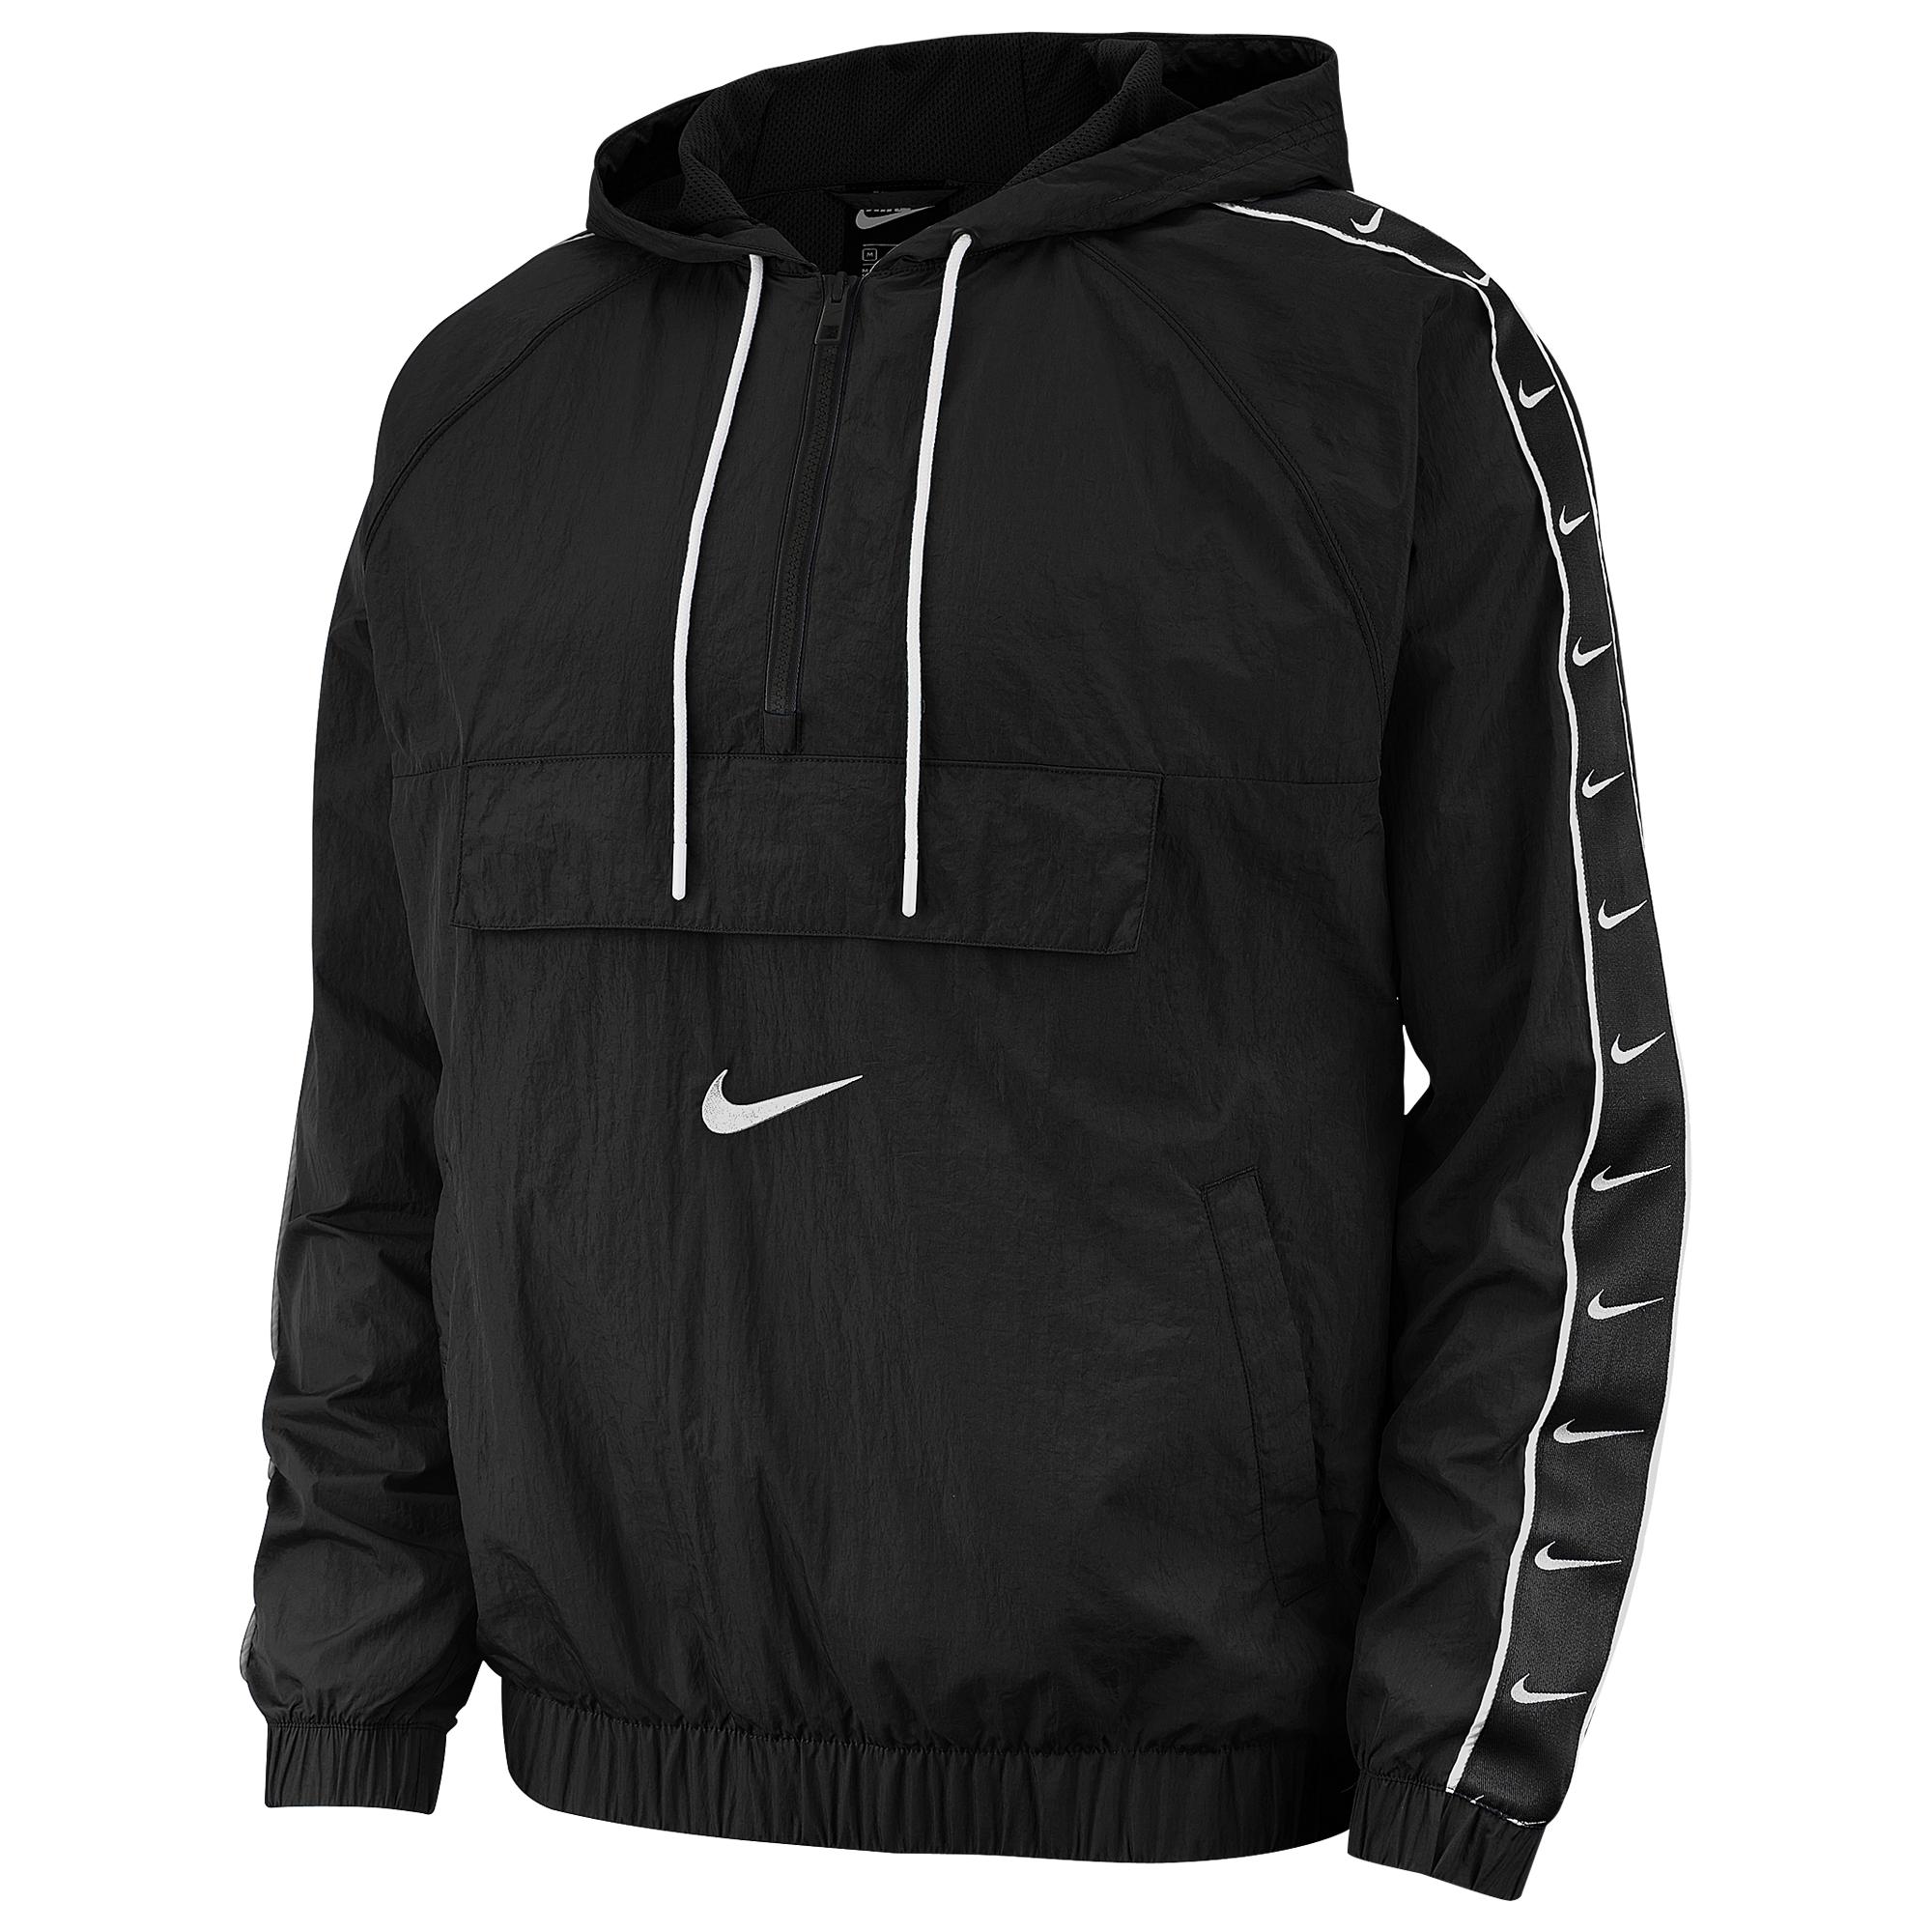 Download Nike Synthetic Swoosh Woven Jacket in Black/White (Black ...